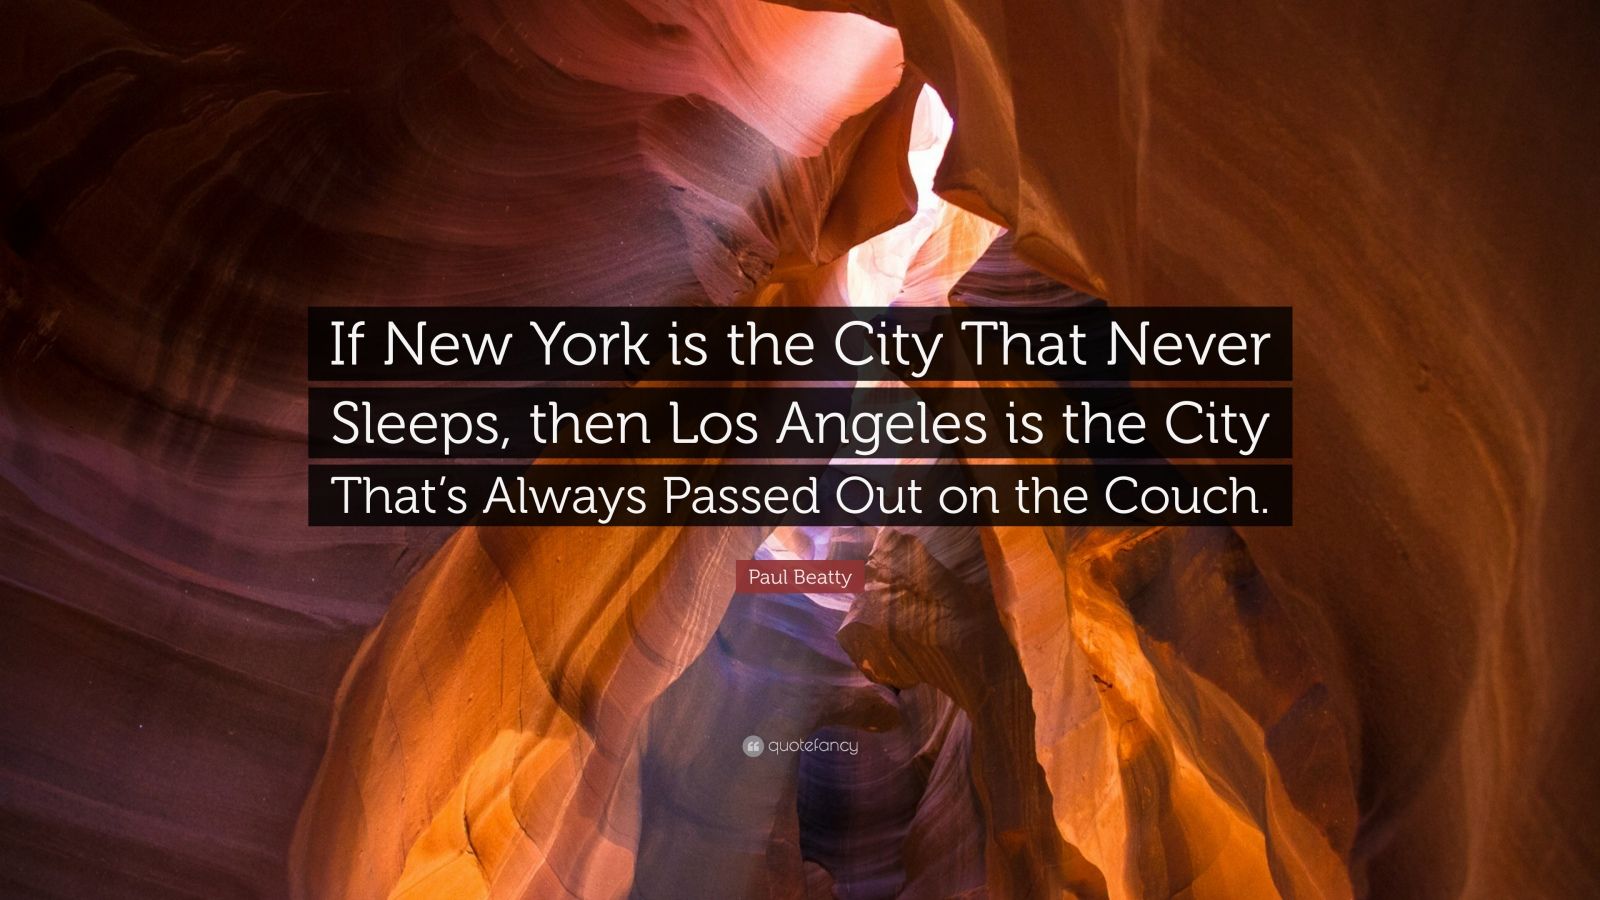 the city that never sleeps! or are we in the middle of no where